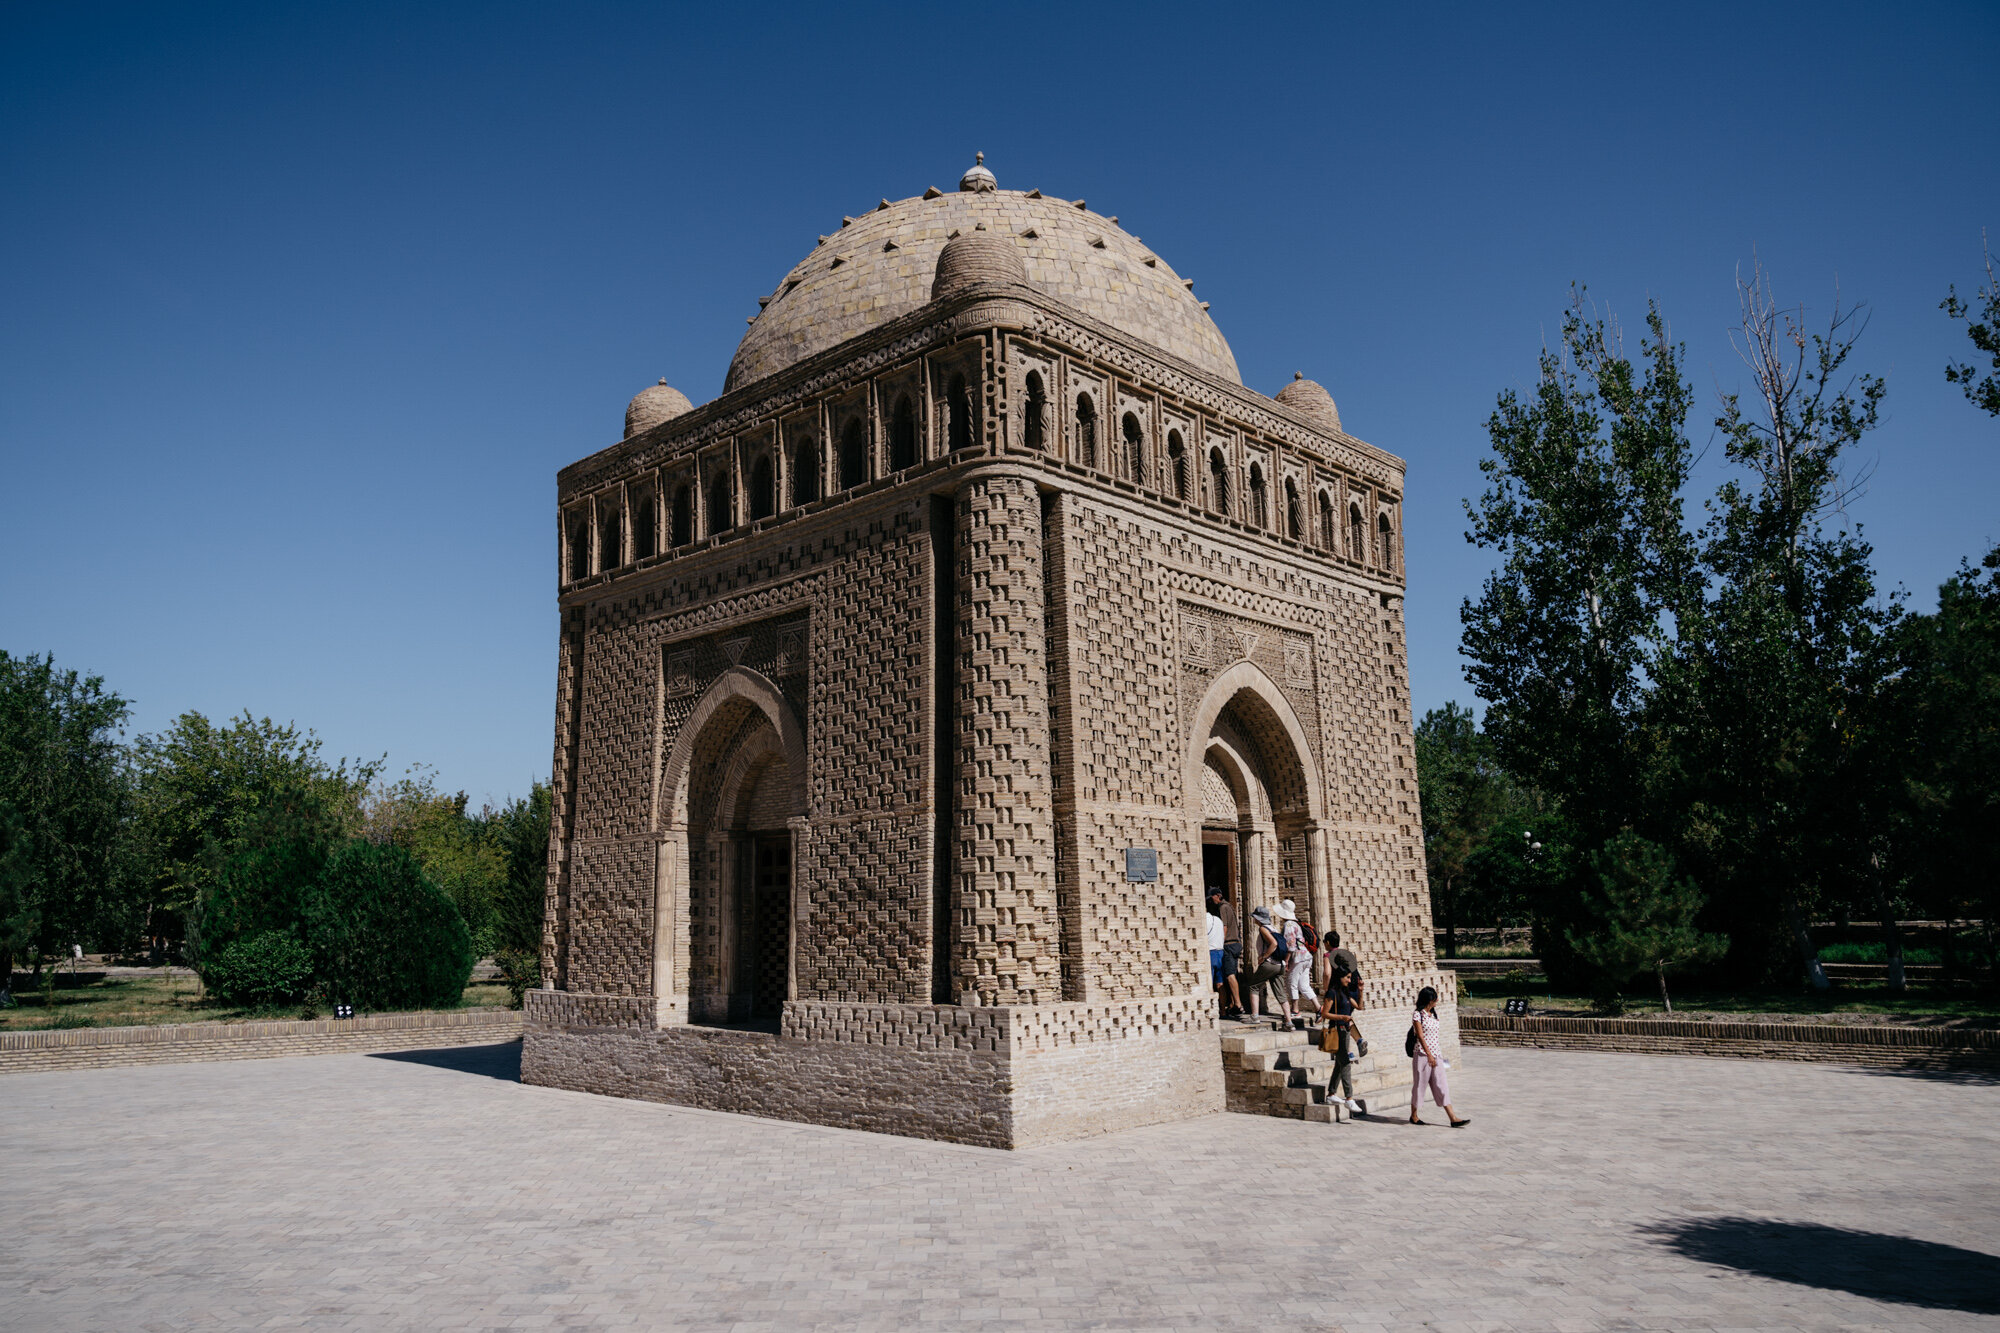  The mausoleum was built as the resting place of the powerful and influential Islamic Samanid dynasty 